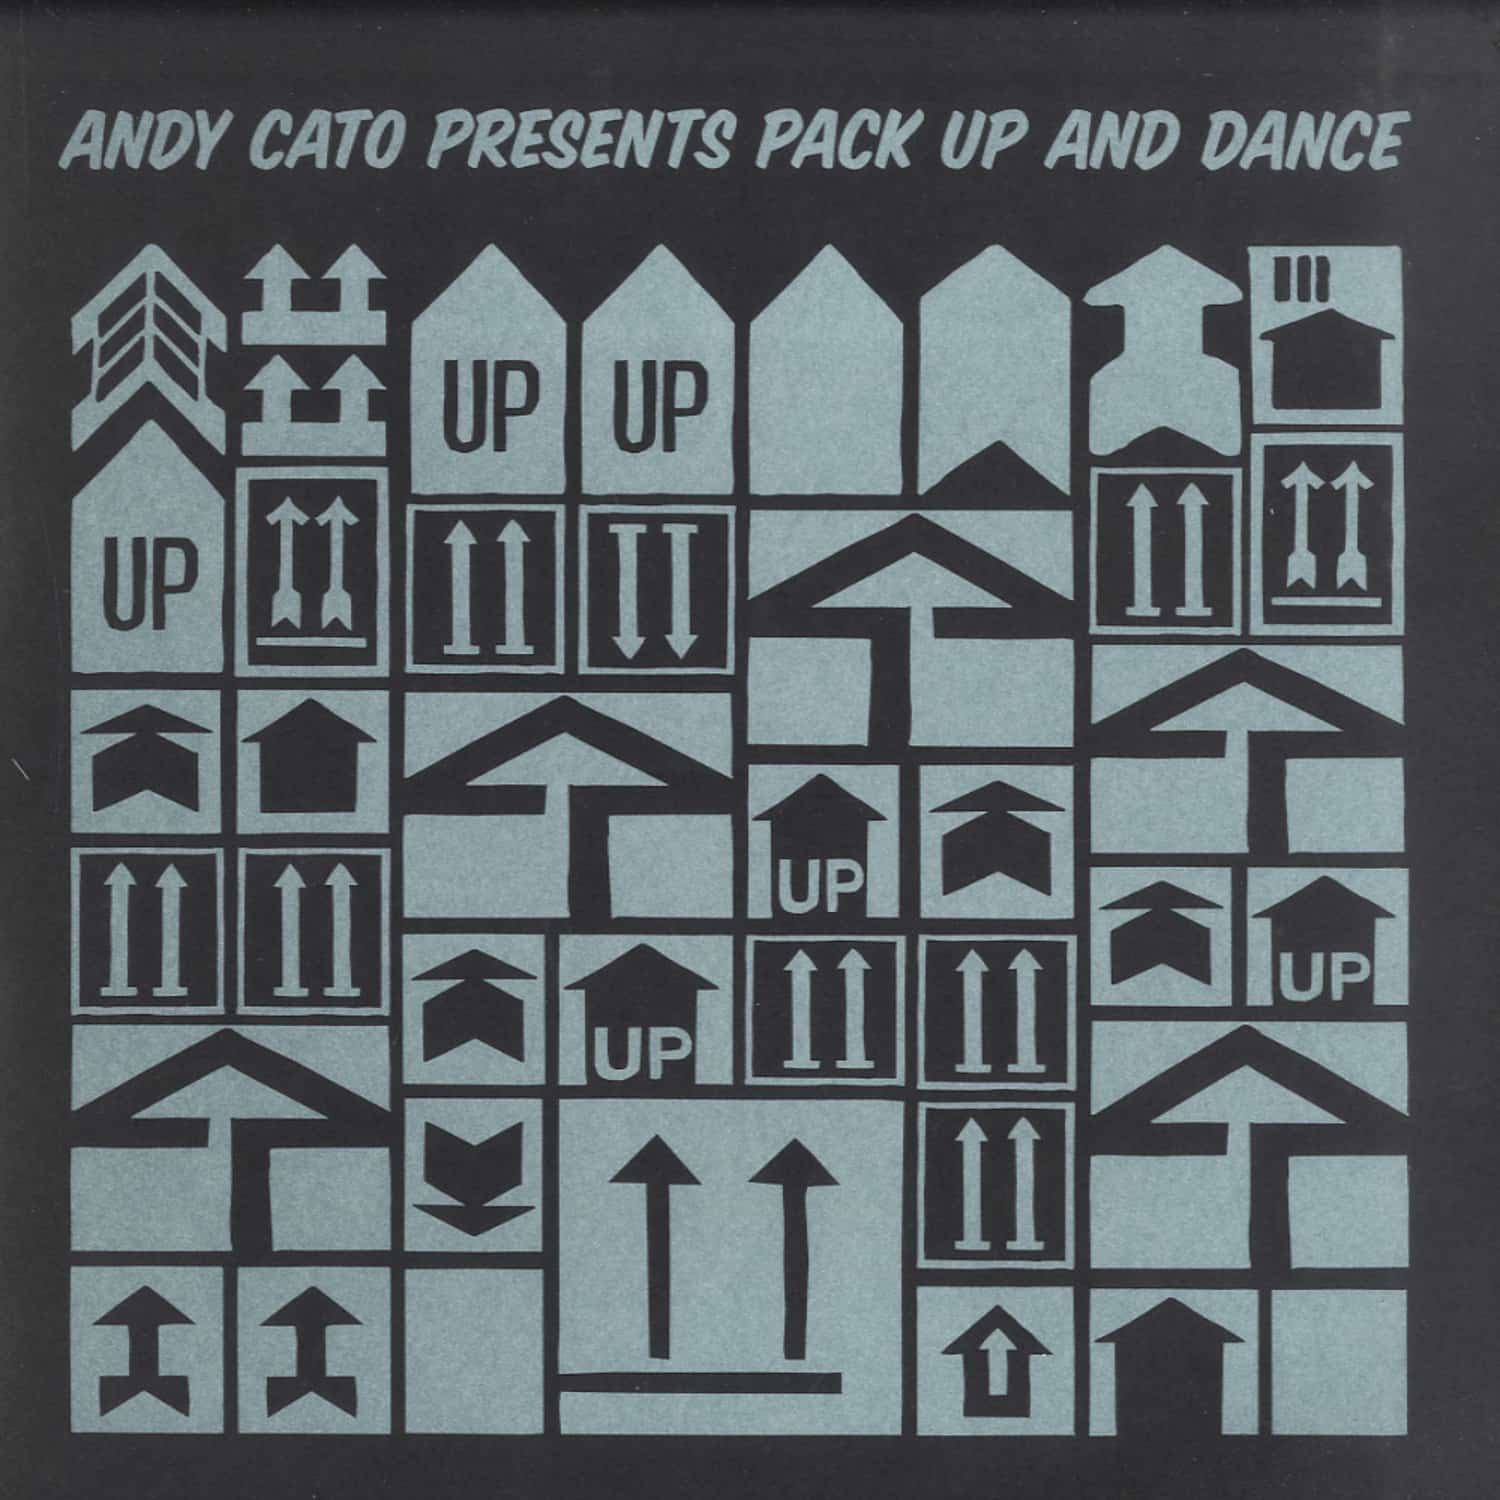 Andy Cato - MORTON LIGHTHOUSE / COSMIC FORCE